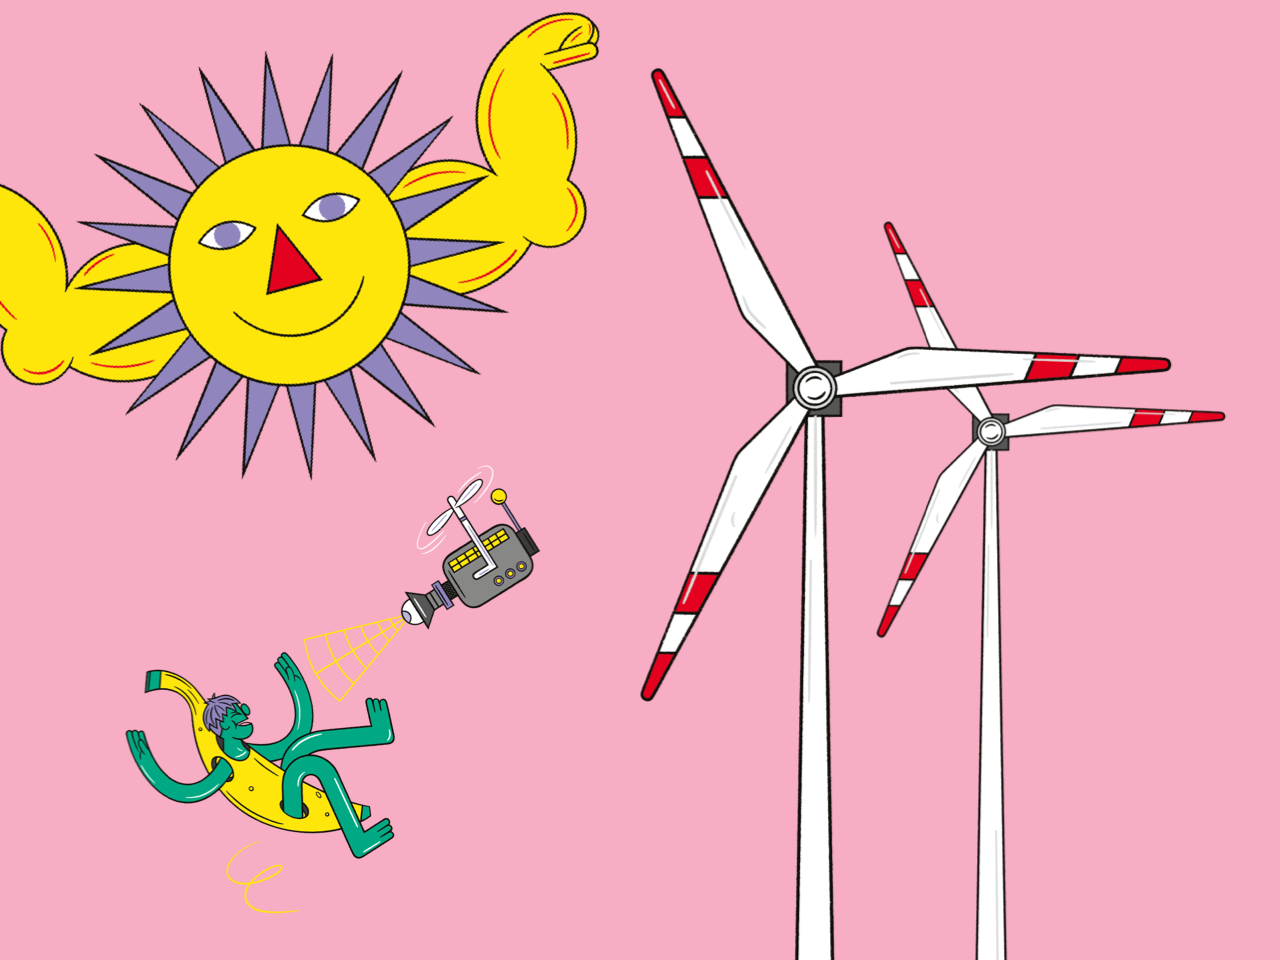 A sun with muscles, two wind turbines and a drone filming a flying person in a banana costume.